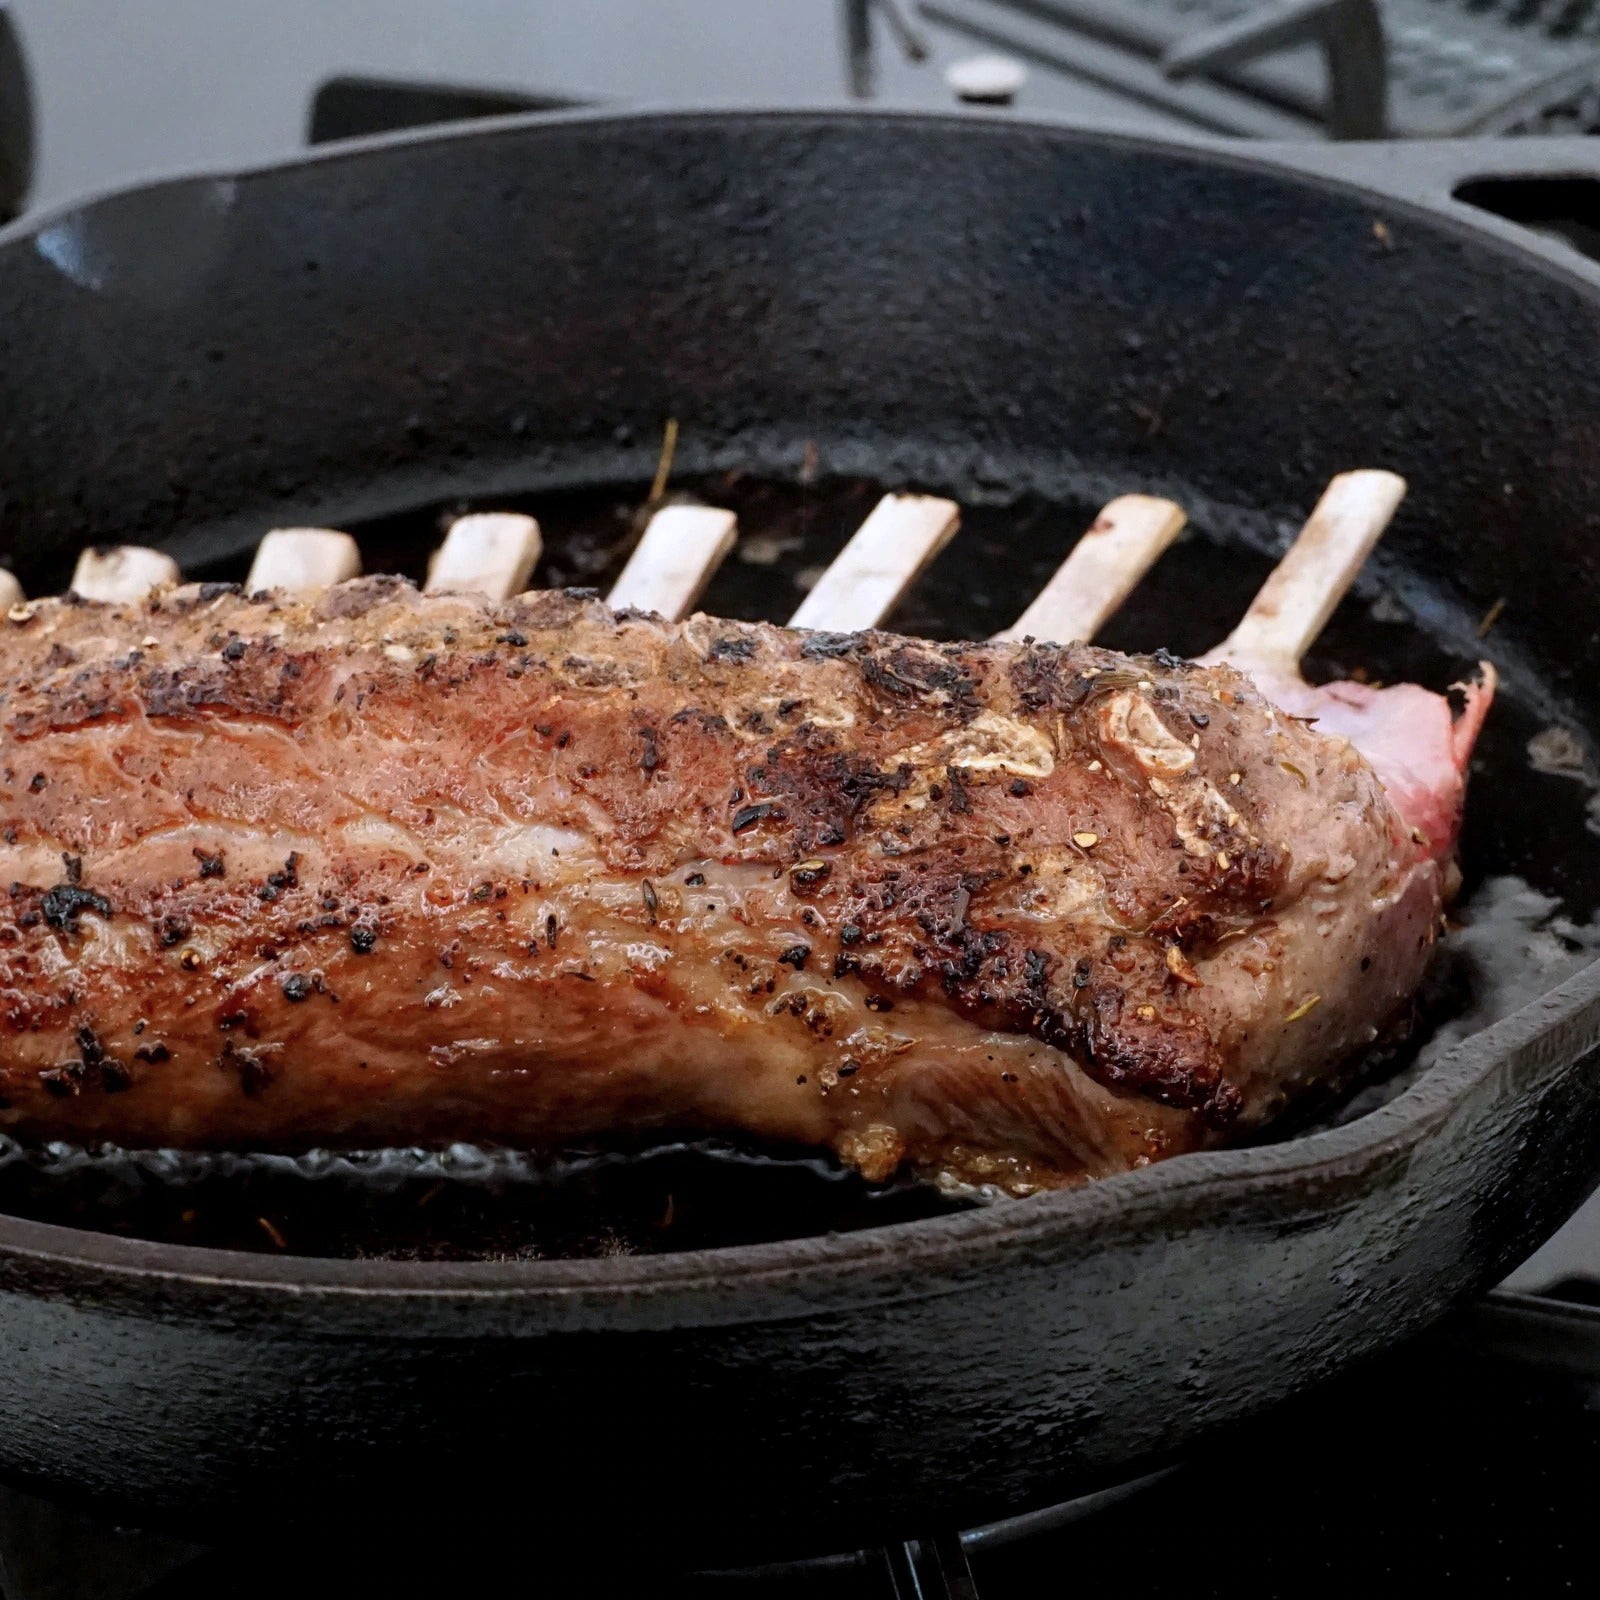 Free-Range Frenched Lamb Rack from New Zealand (450g) - Horizon Farms